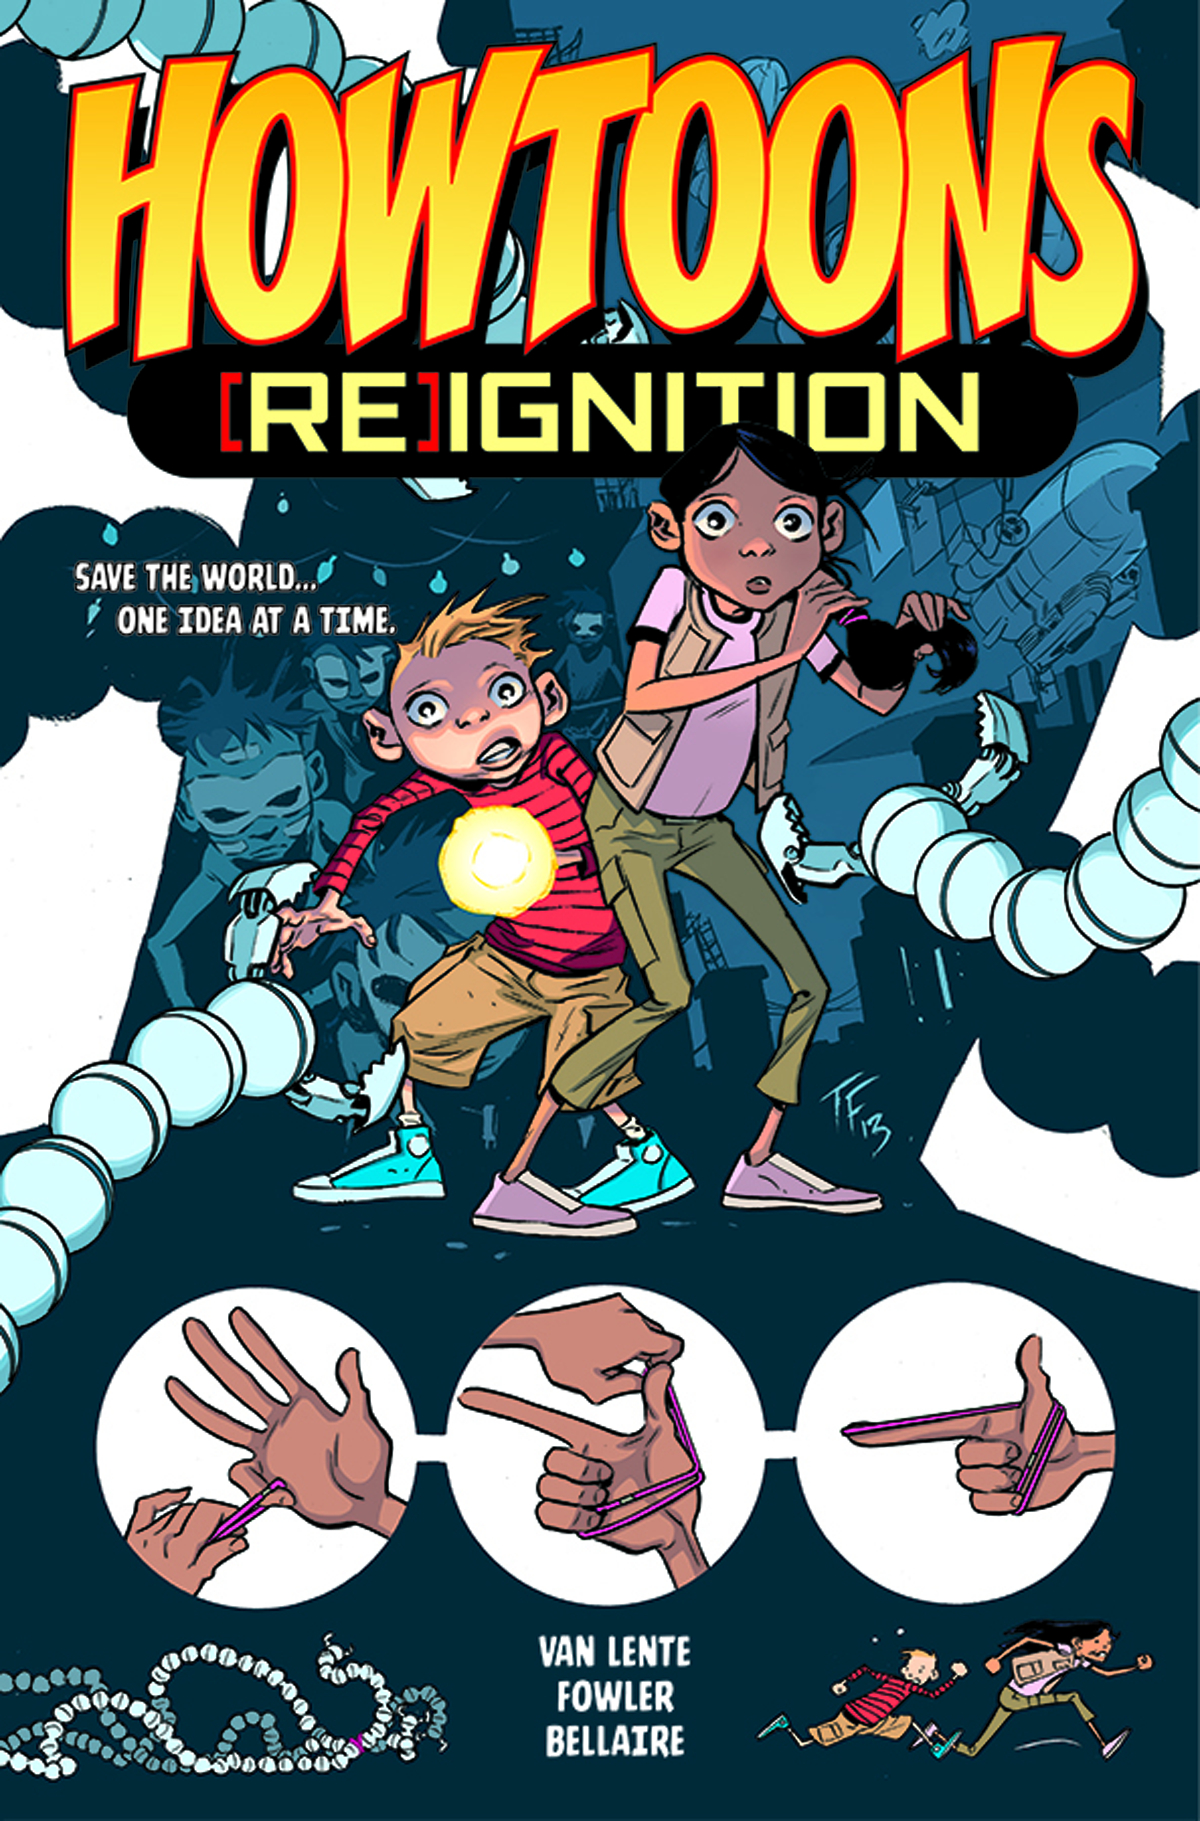 HOWTOONS REIGNITION #1